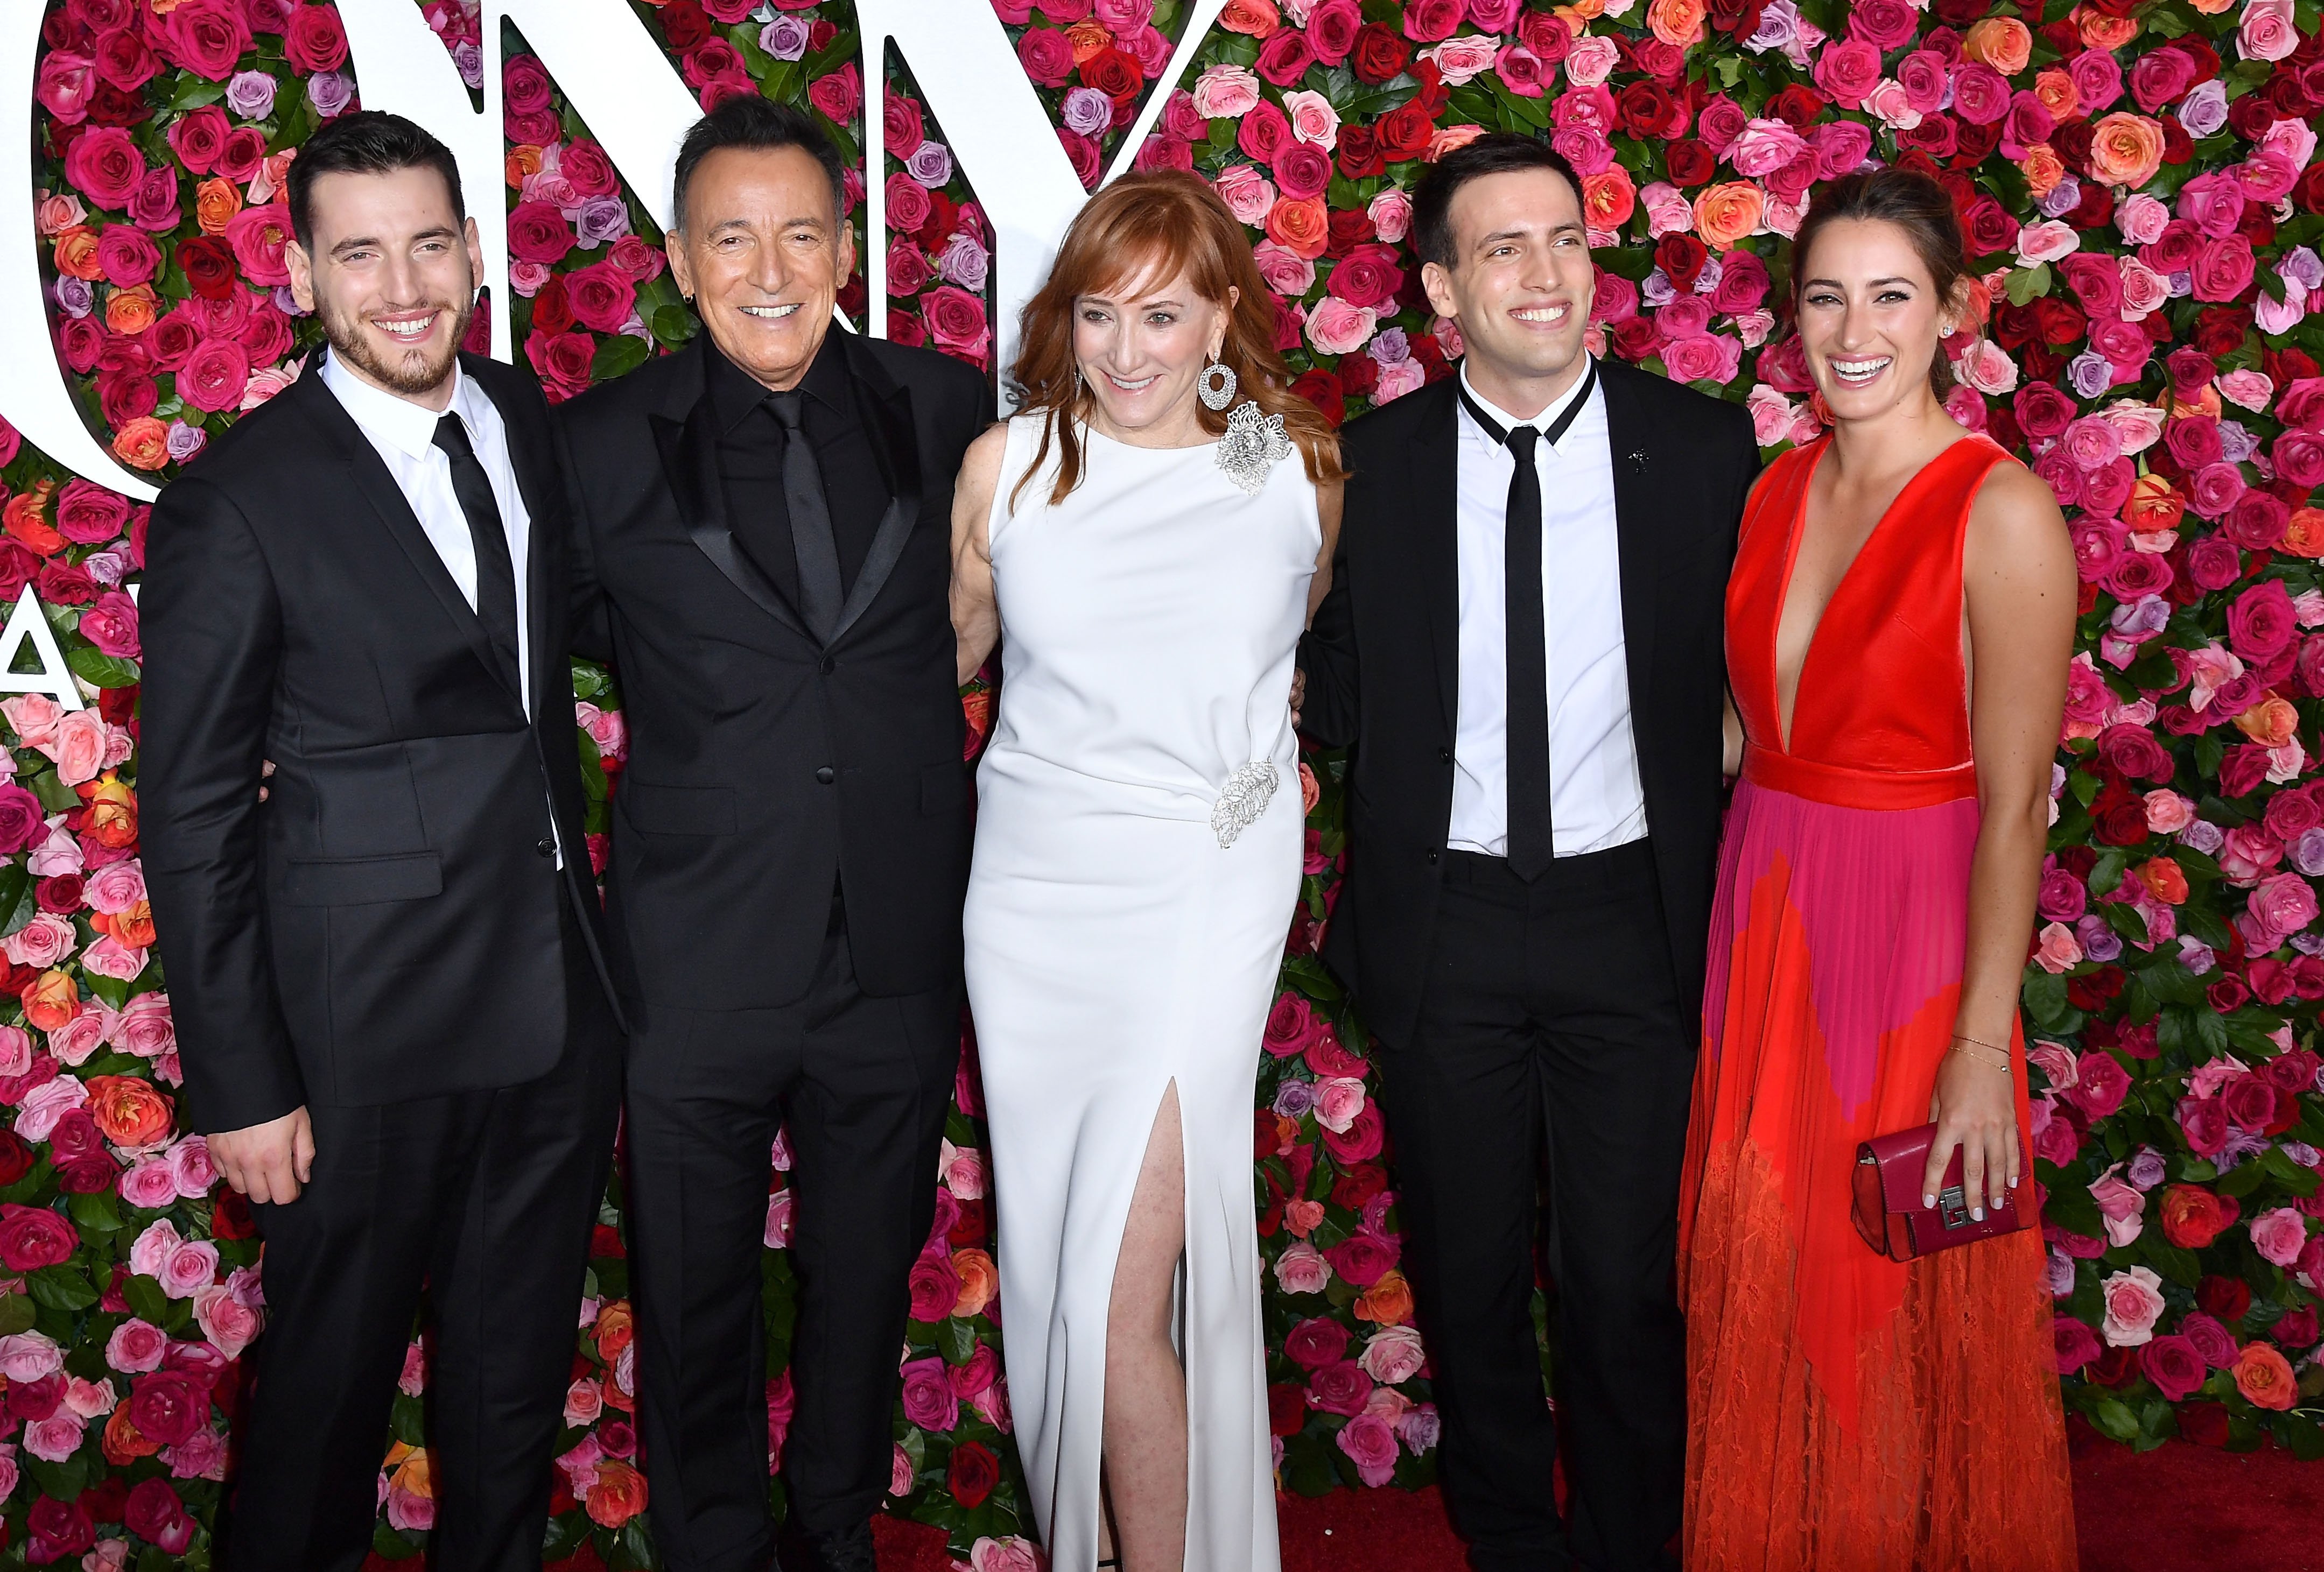 Evan Springsteen, US singer Bruce Springsteen, Patti Scialfa, Sam Springsteen and Jessica Springsteen attend the 2018 Tony Awards - Red Carpet at Radio City Music Hall in New York City on June 10, 2018. | Source: Getty Images